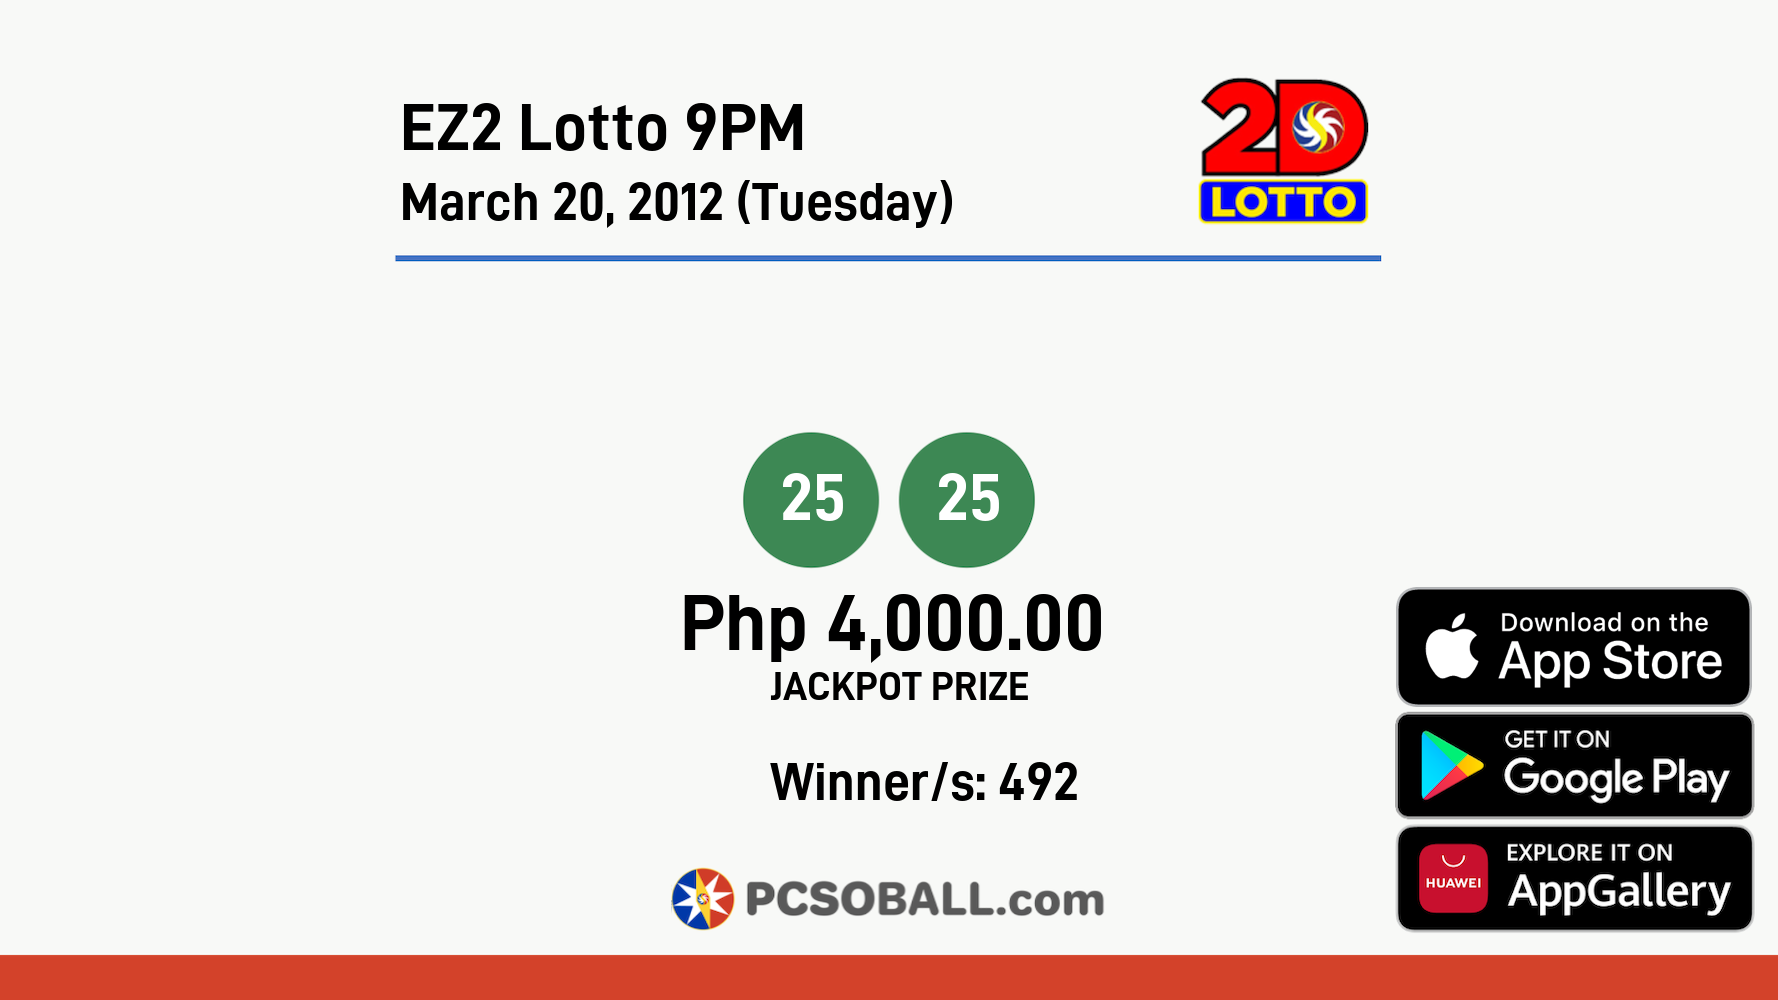 EZ2 Lotto 9PM March 20, 2012 (Tuesday) Result